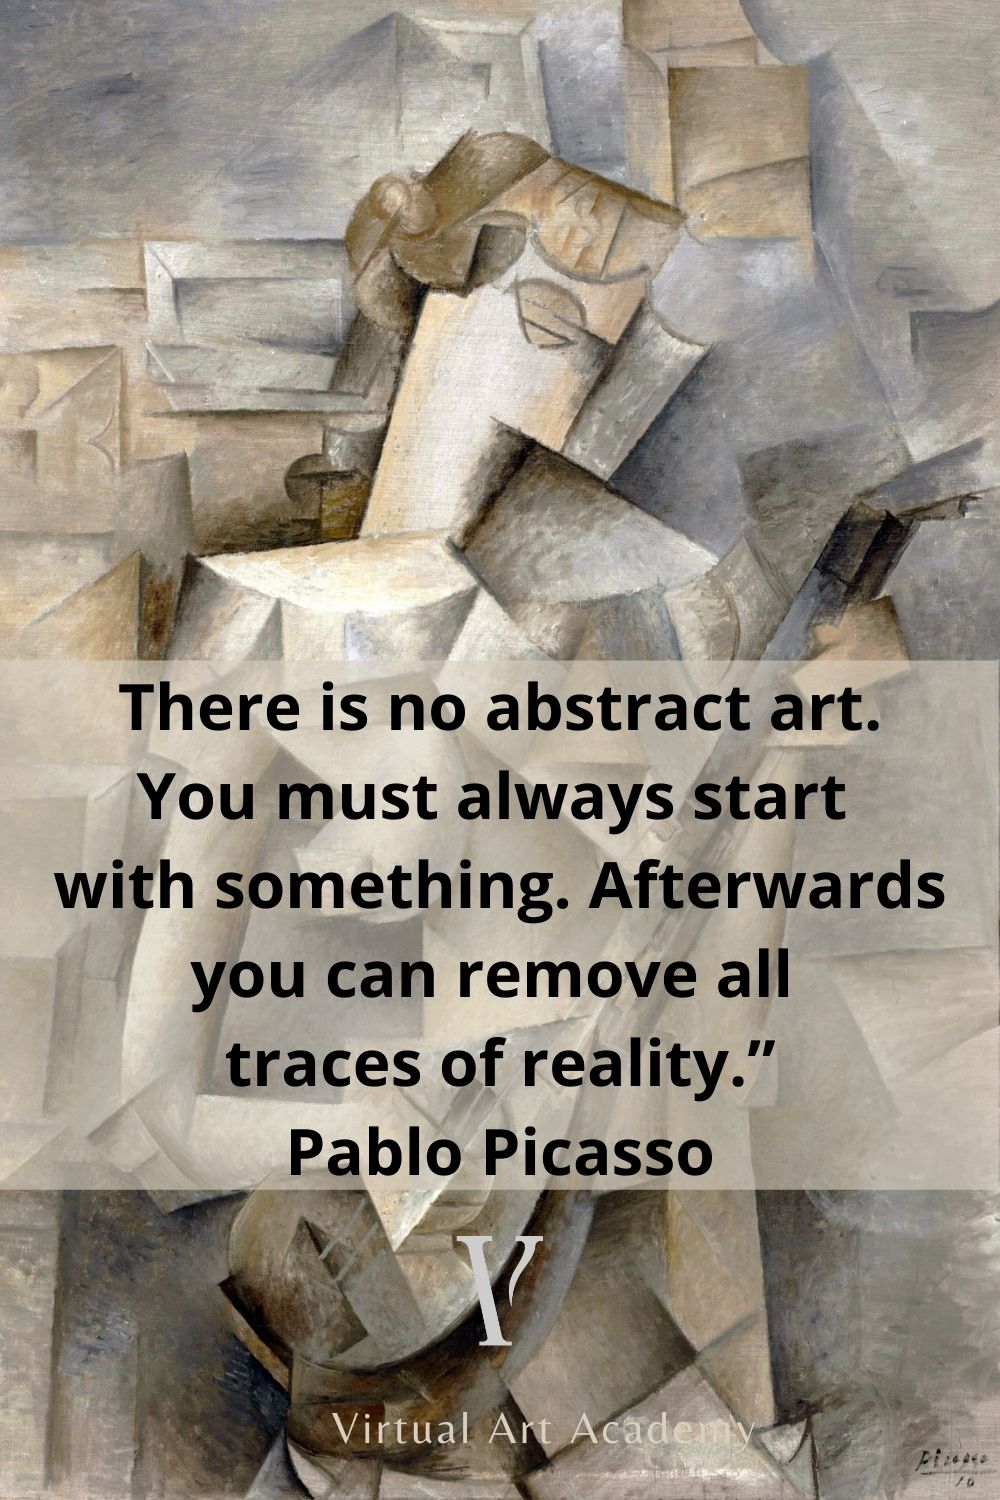 Picasso On Abstract Art